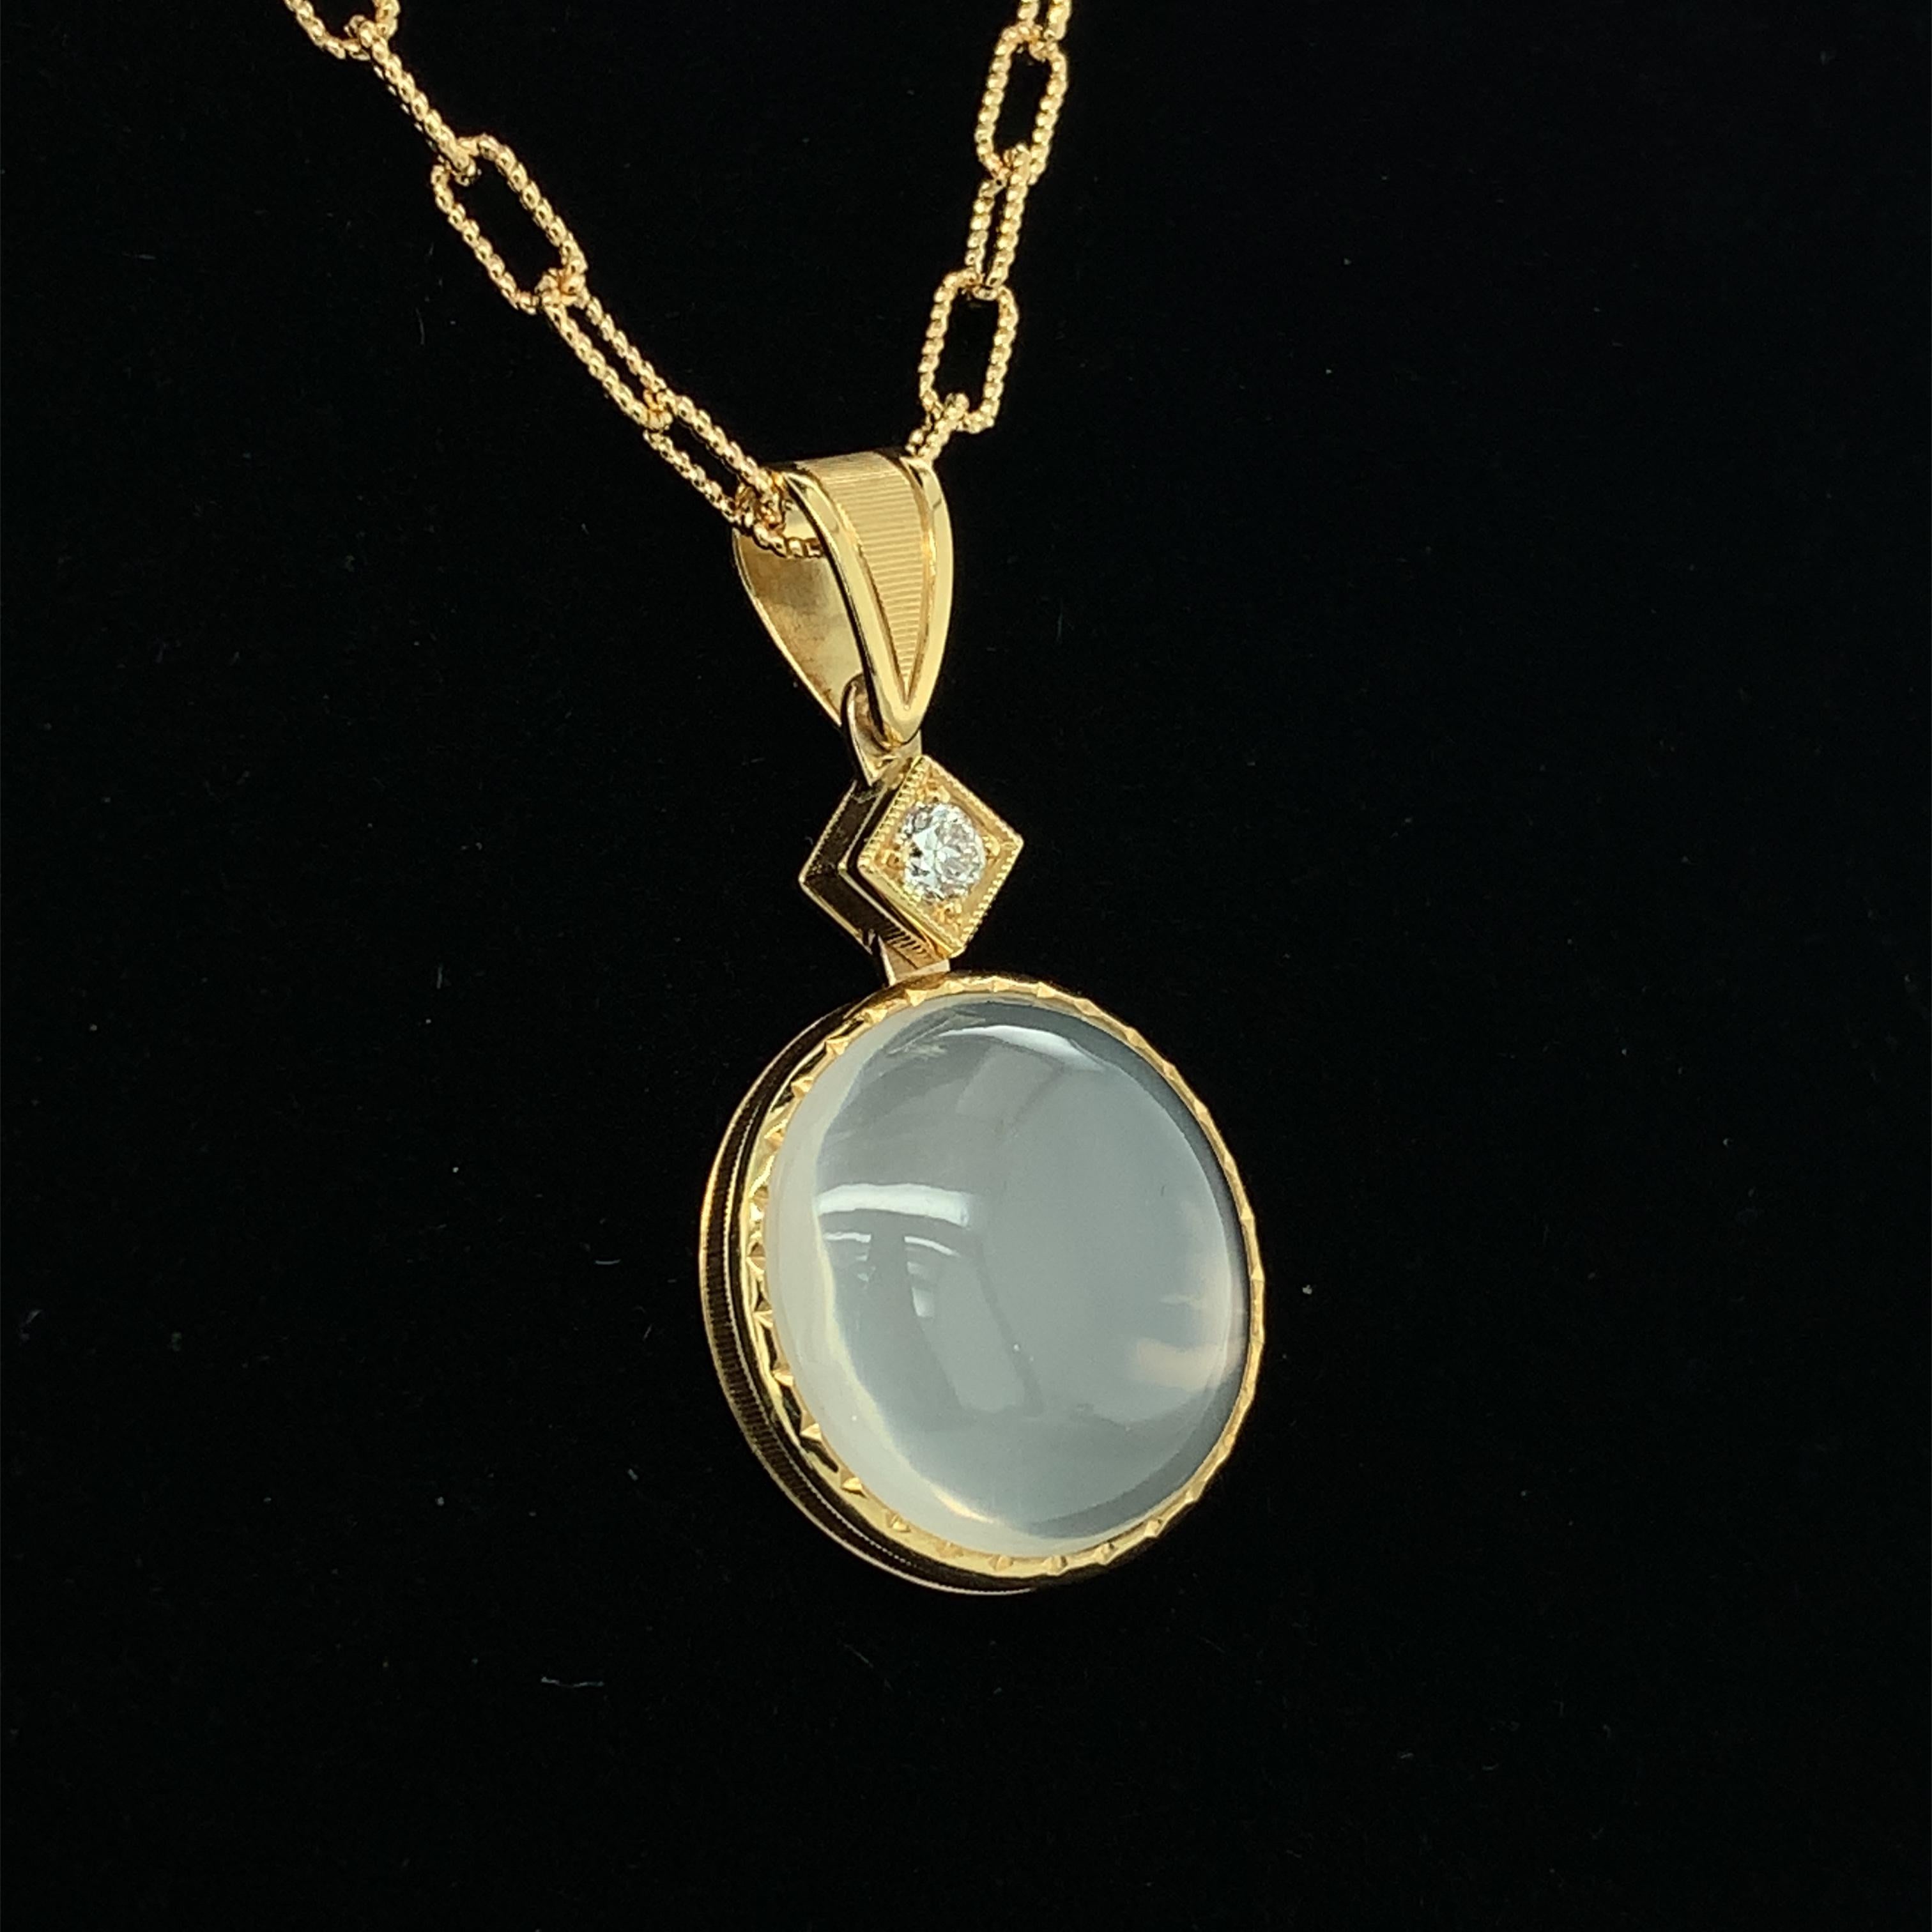 This striking pendant features a large and impressive round moonstone set in an exquisite 18k yellow gold handcrafted and hand engraved bezel. Set atop the moonstone drop is a beautiful round diamond in its own handmade setting. The workmanship on